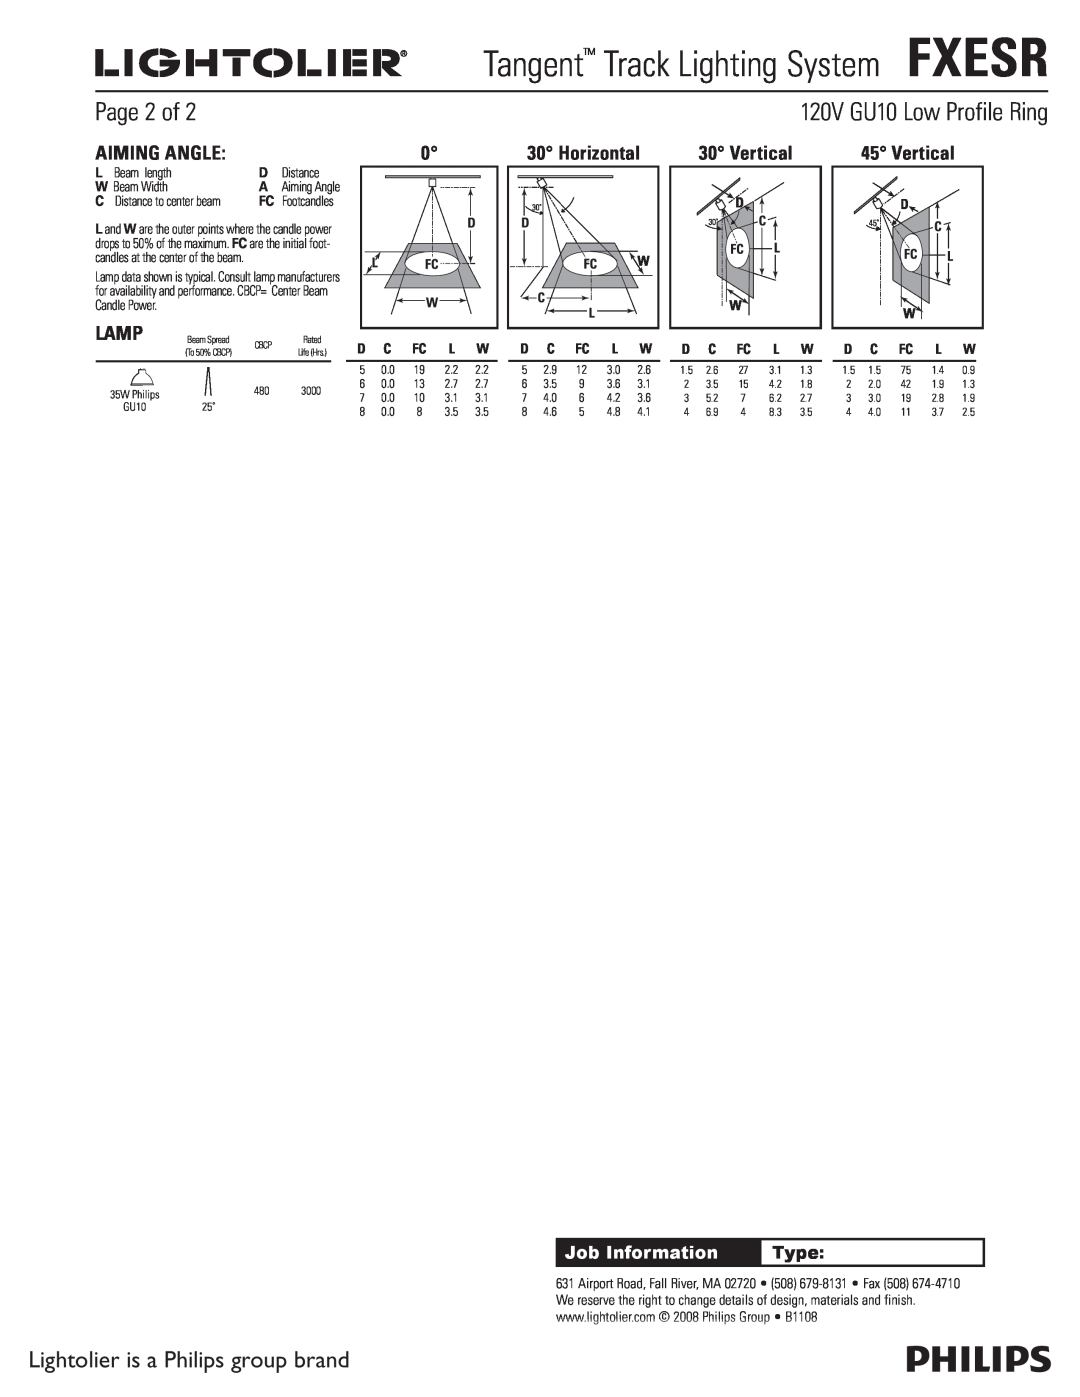 Lightolier Page 2 of, Aiming Angle, Lamp, Horizontal, Vertical, Tangent Track Lighting SystemFXESR, Job Information 